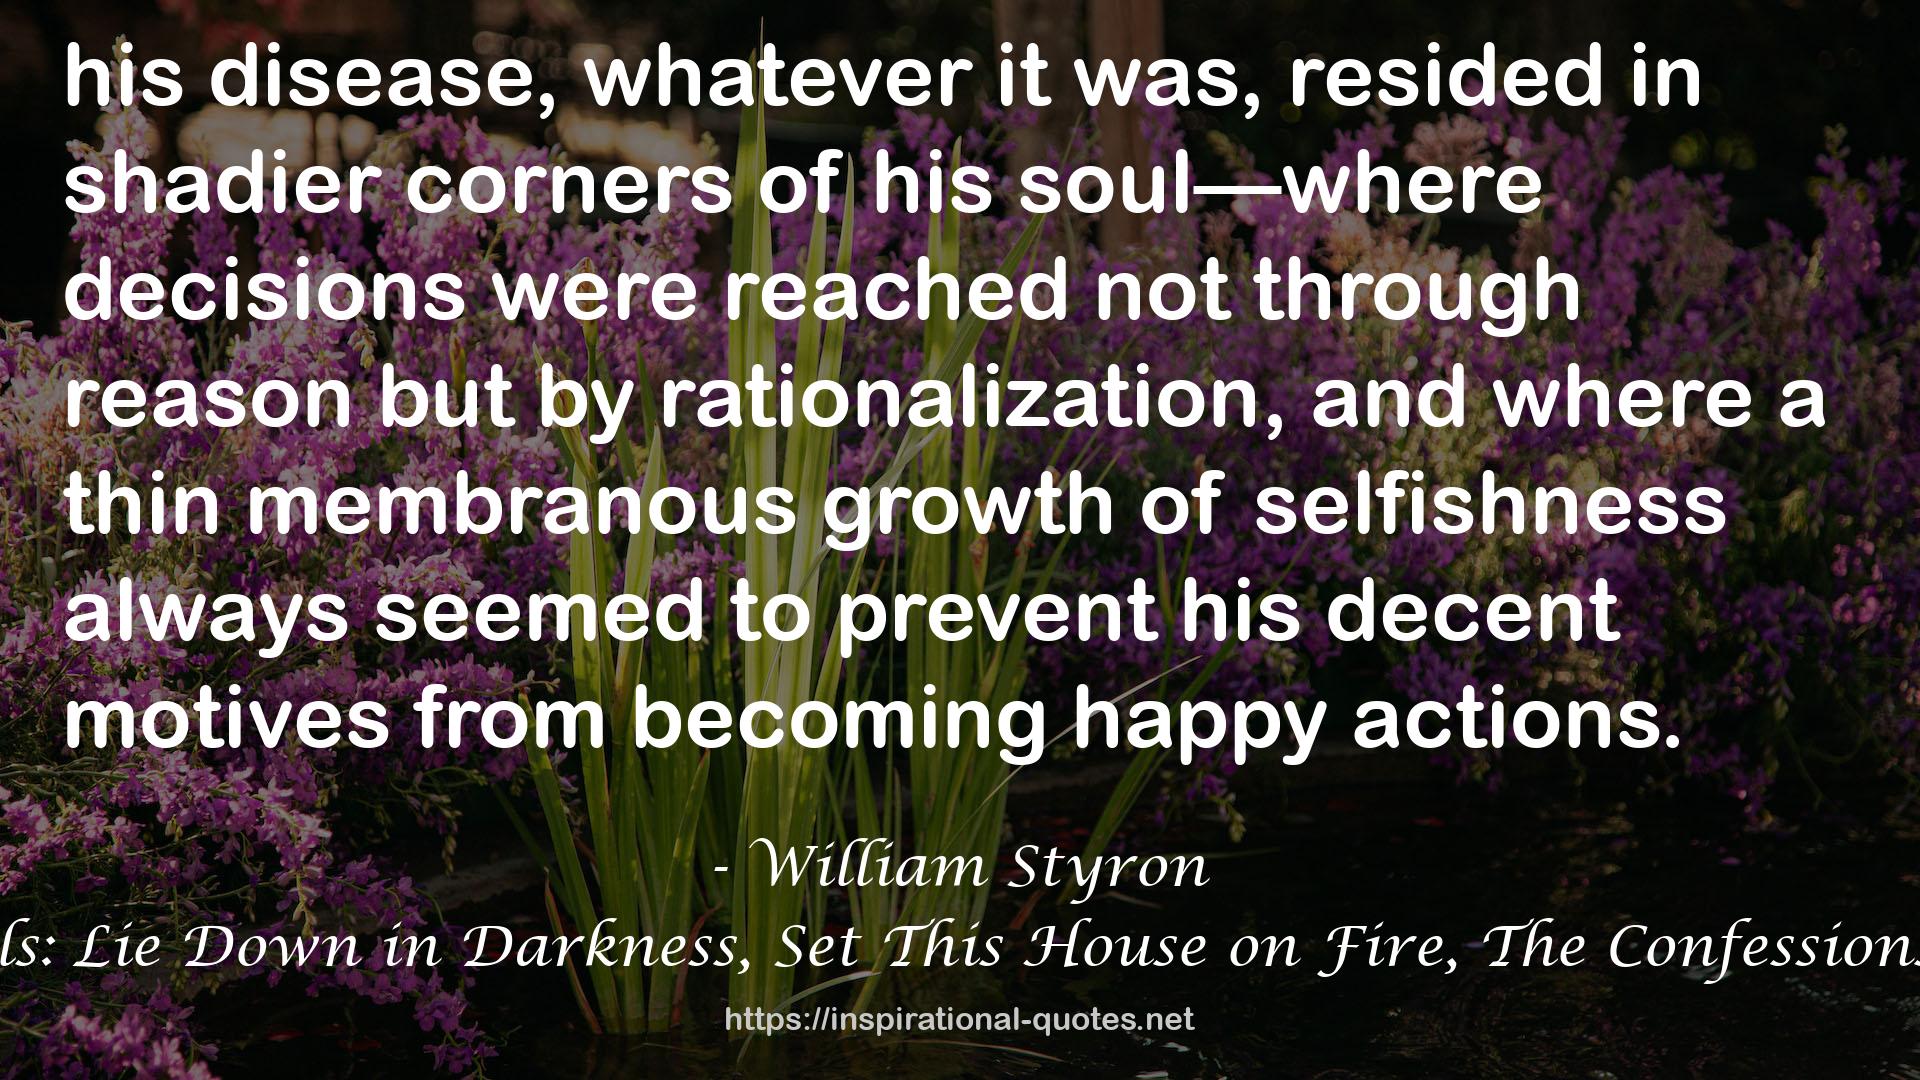 William Styron, The Collected Novels: Lie Down in Darkness, Set This House on Fire, The Confessions of Nat Turner, and Sophie's Choice QUOTES